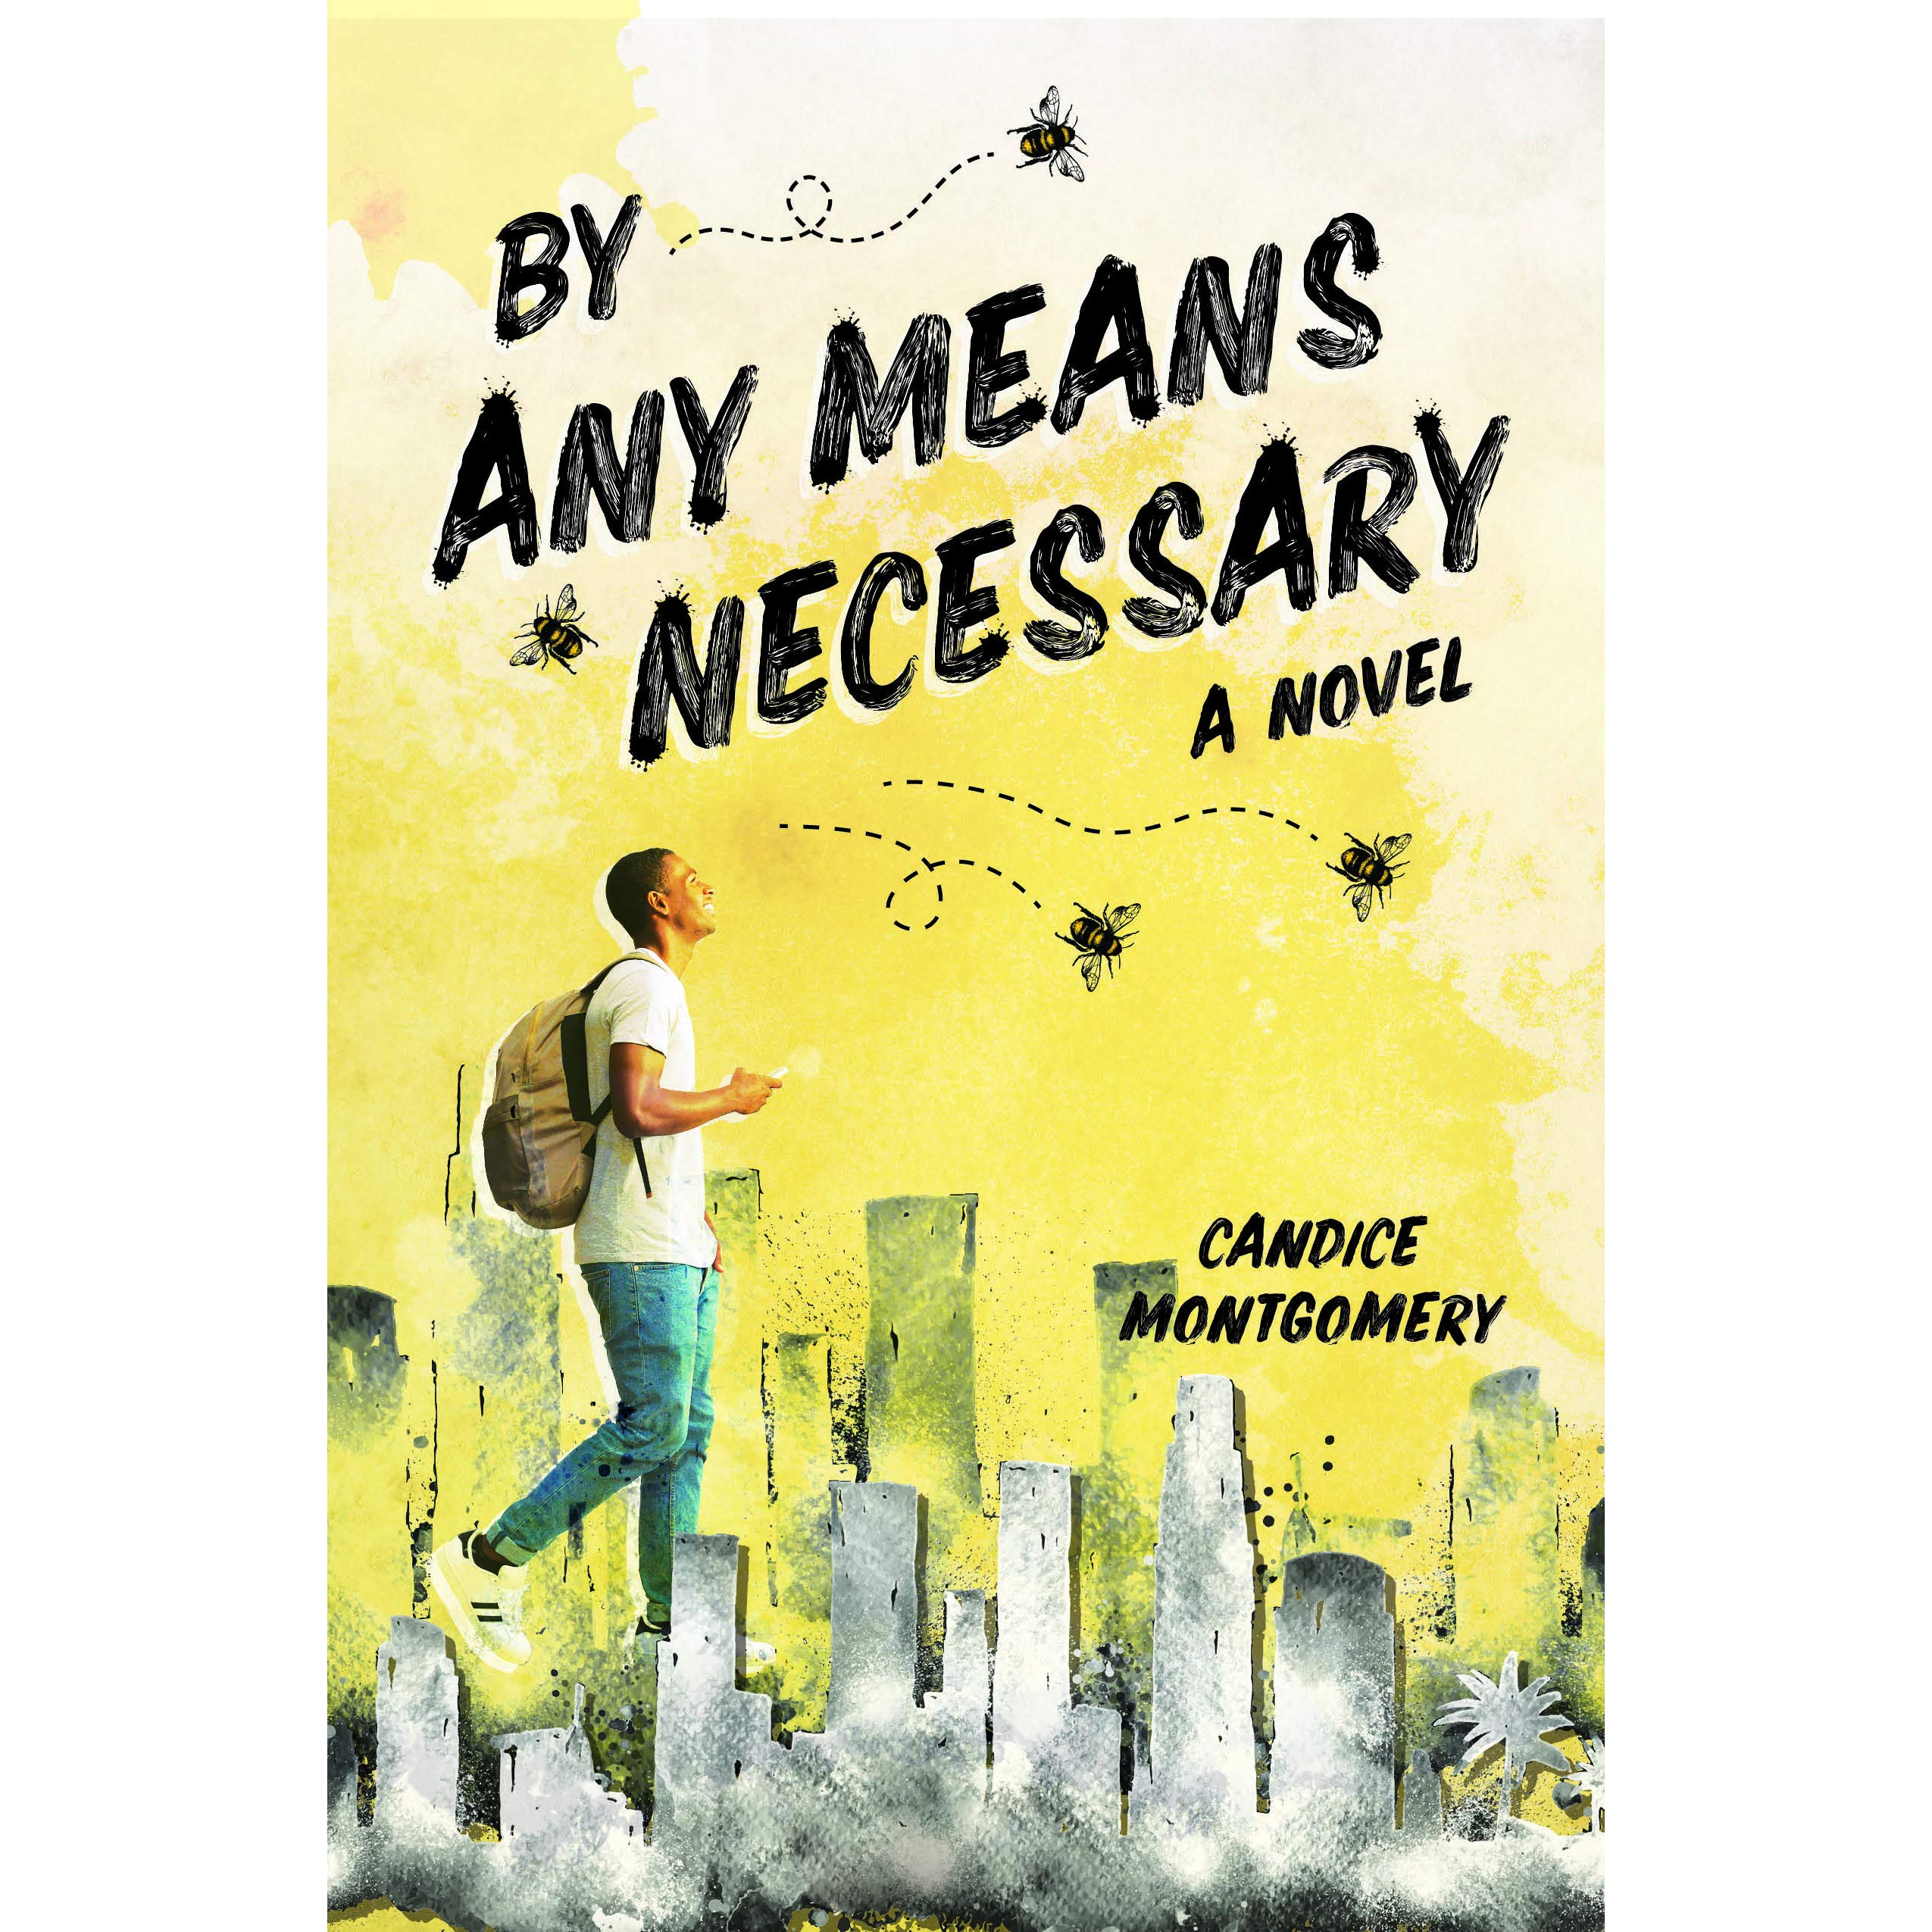 Book Review: “By Any Means Necessary” by Candice Montgomery